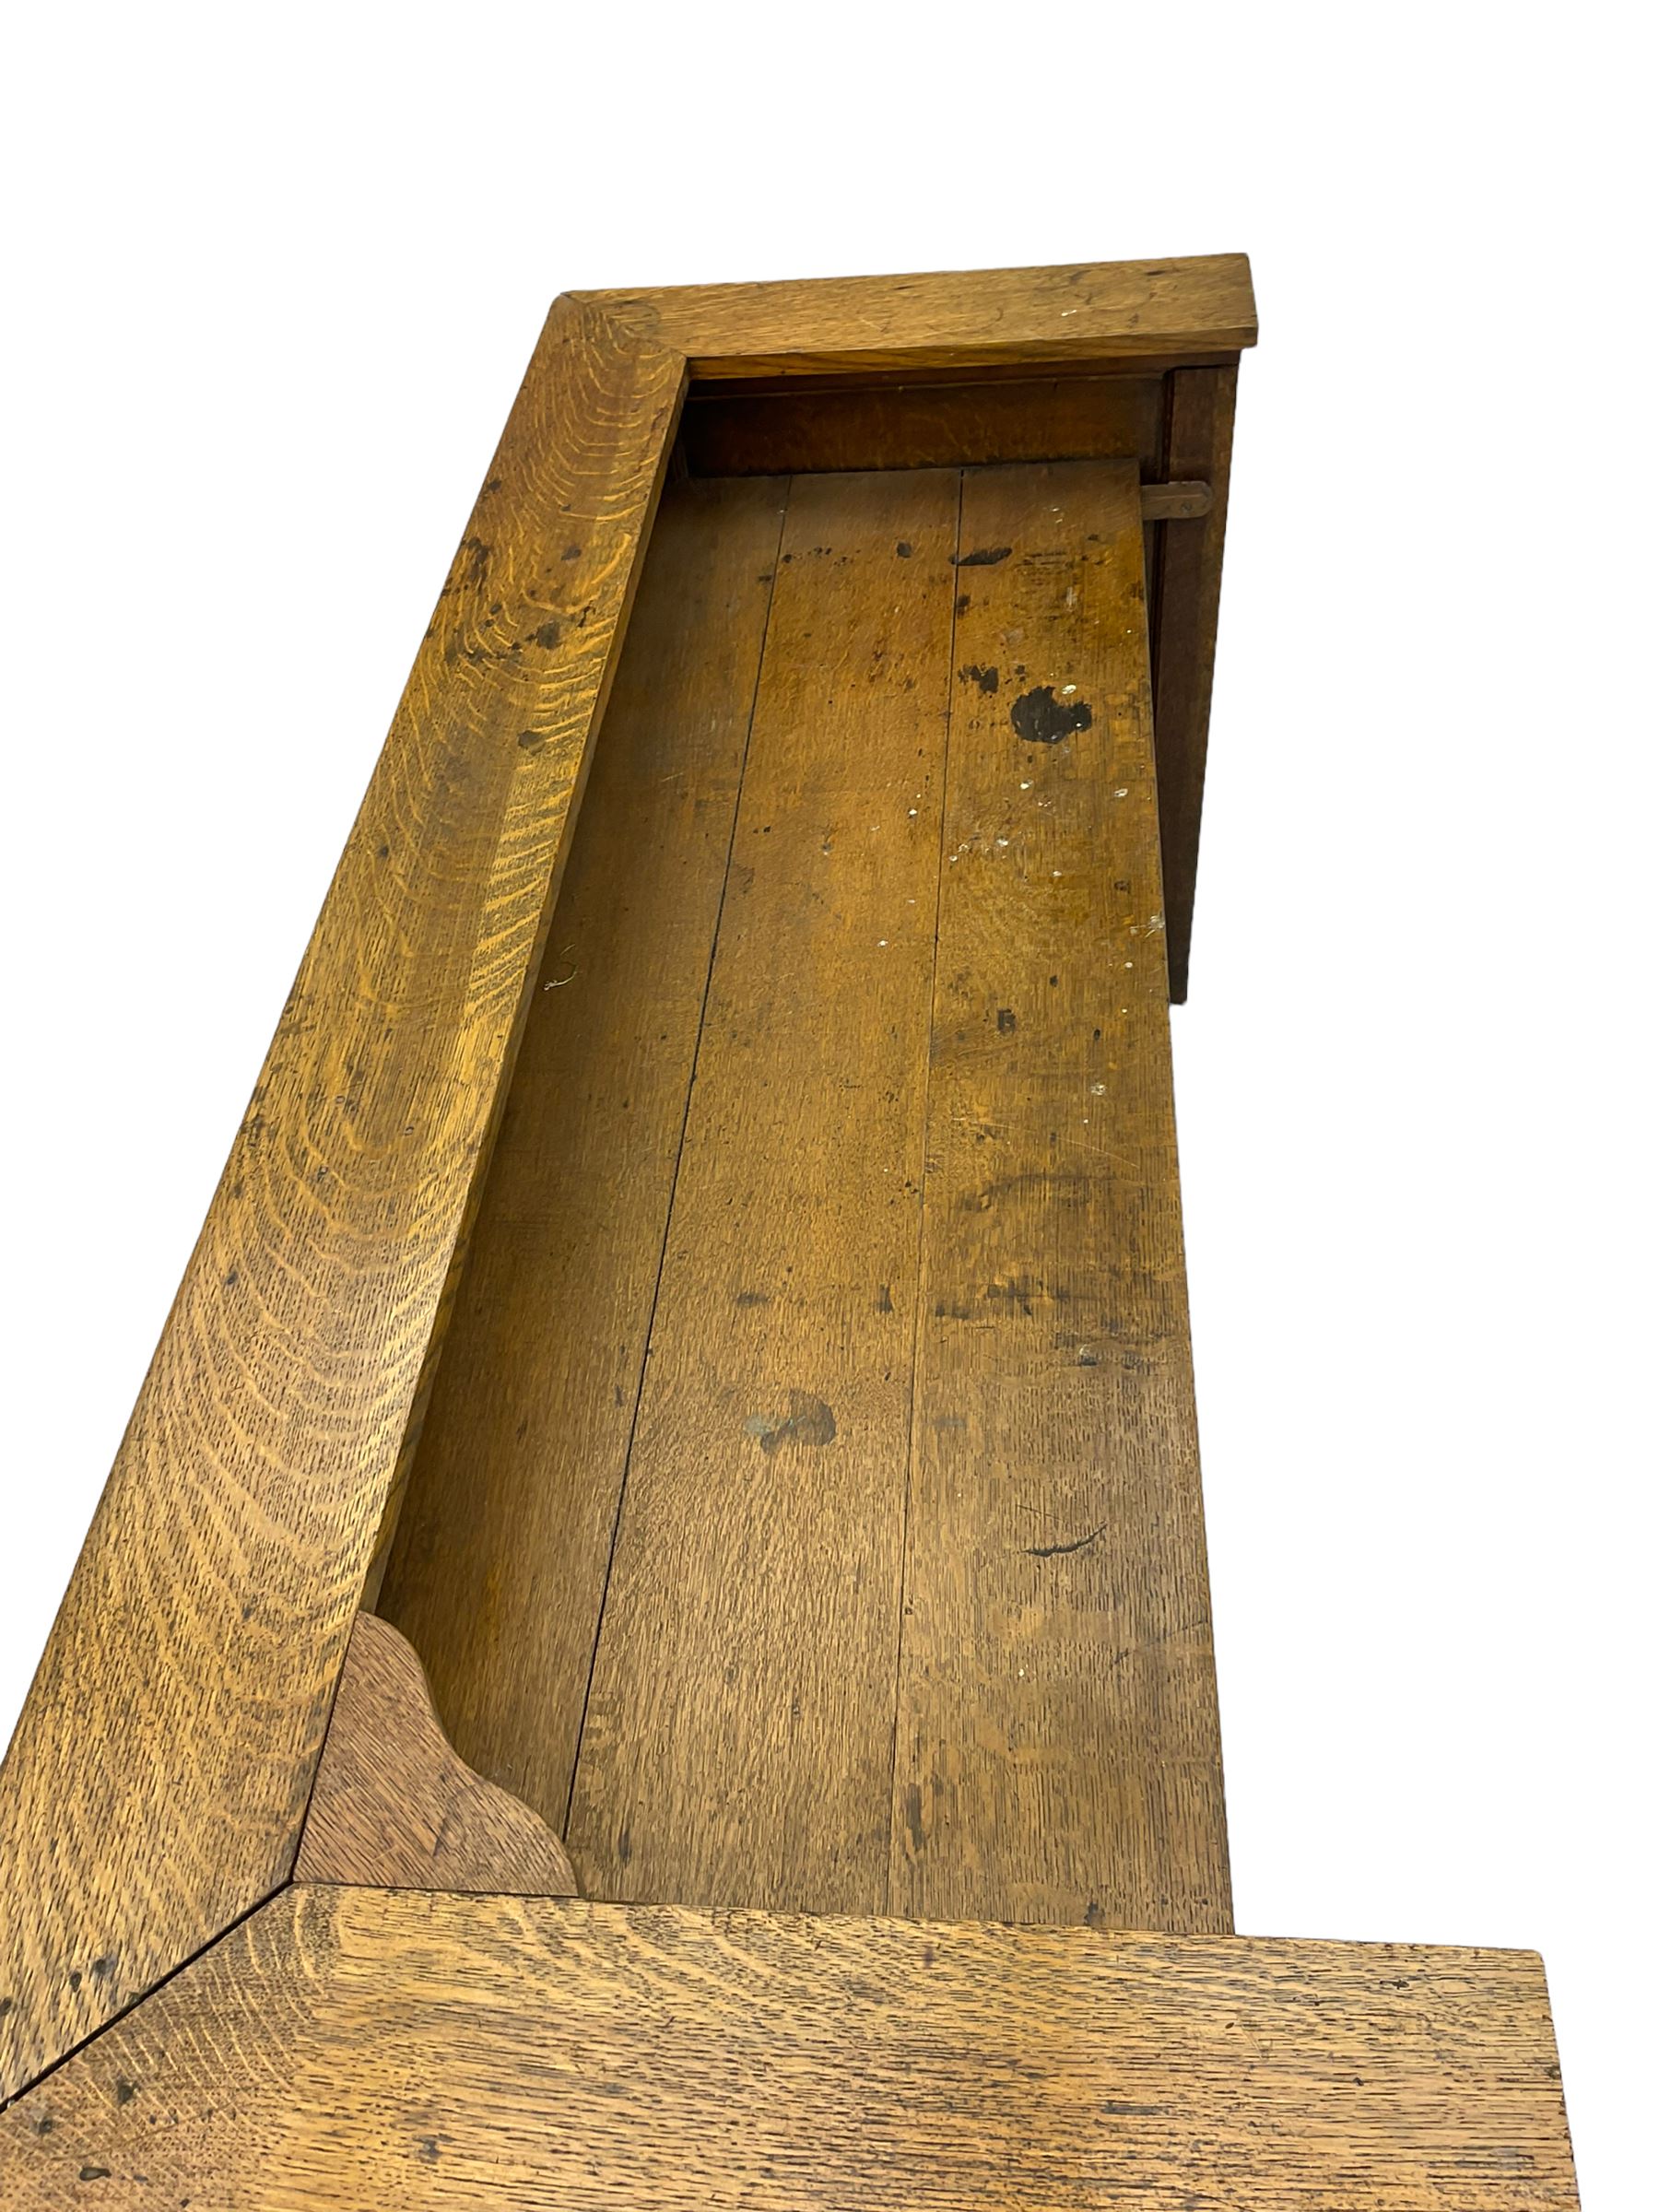 Early 20th century oak rostrum or clerks stand - Image 4 of 7